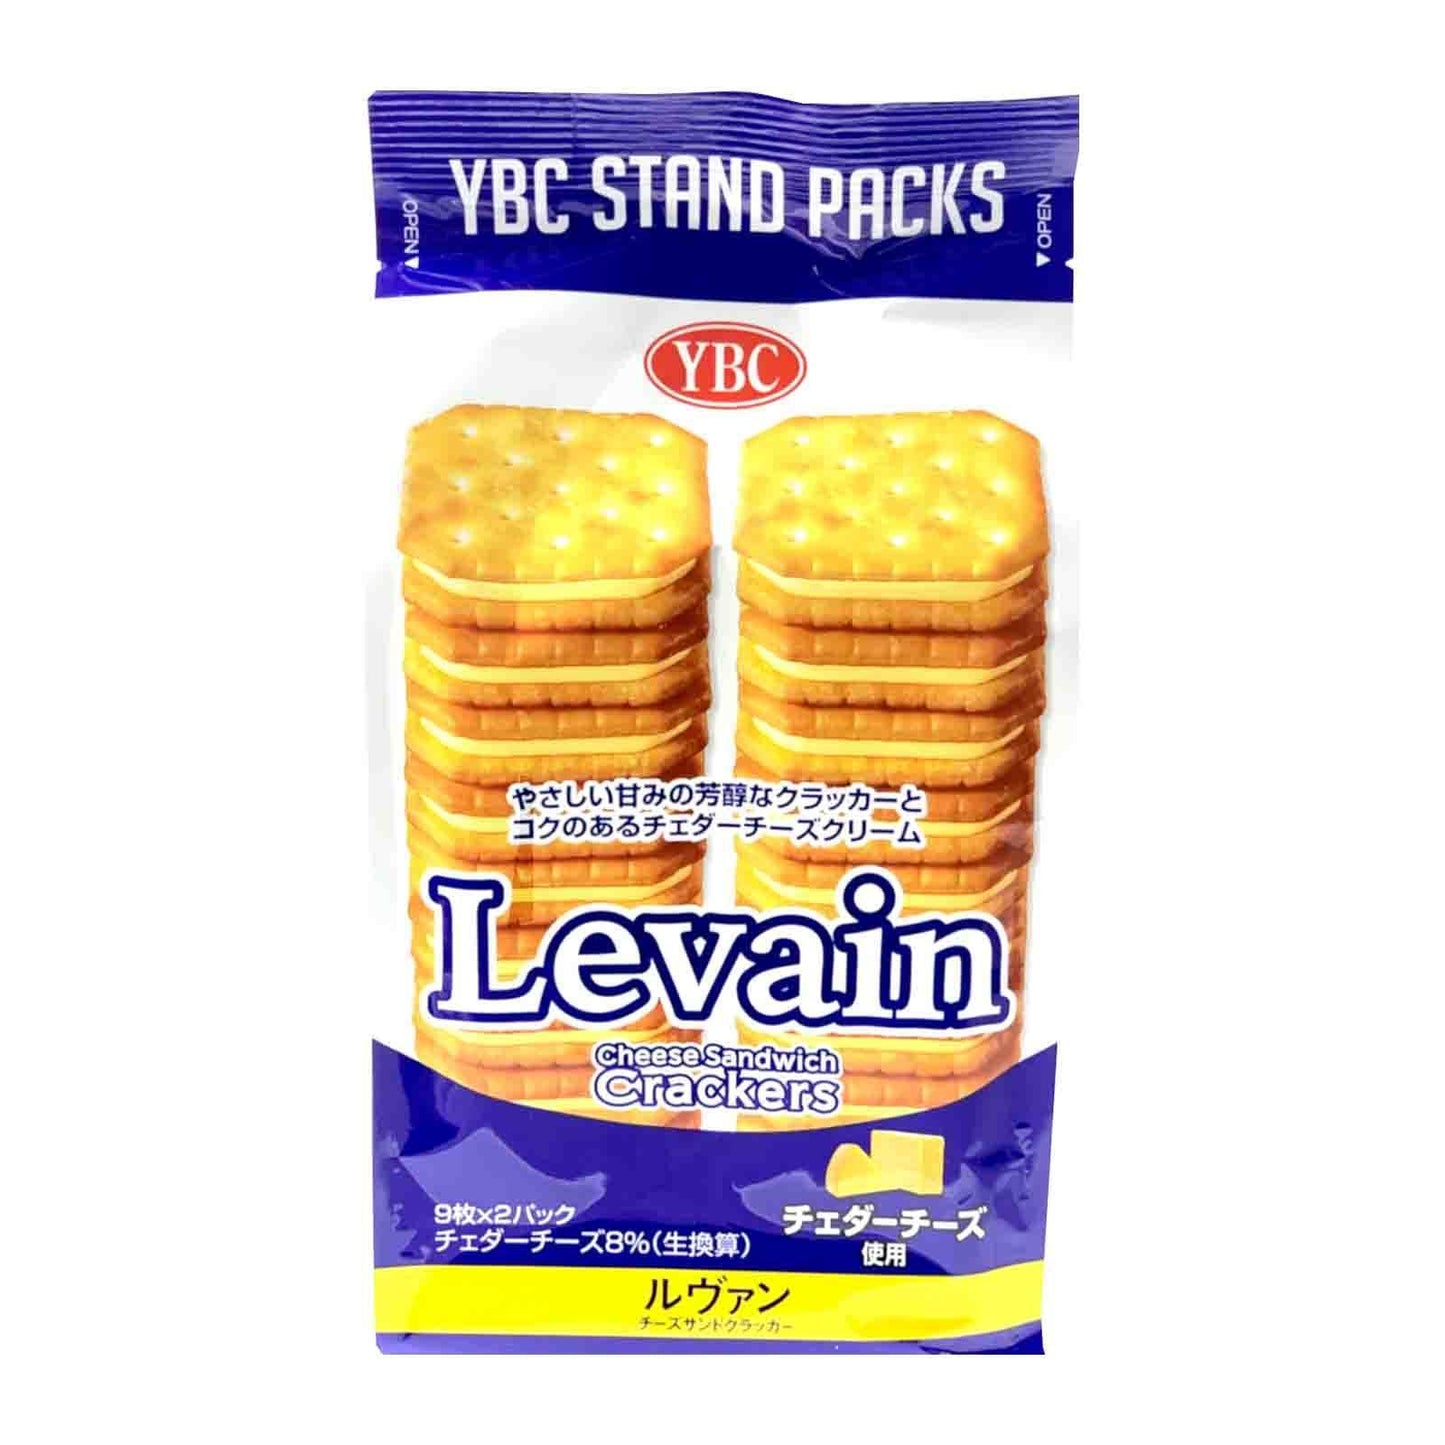 YBC Levain Cheese Sandwich ( pack of 18 )